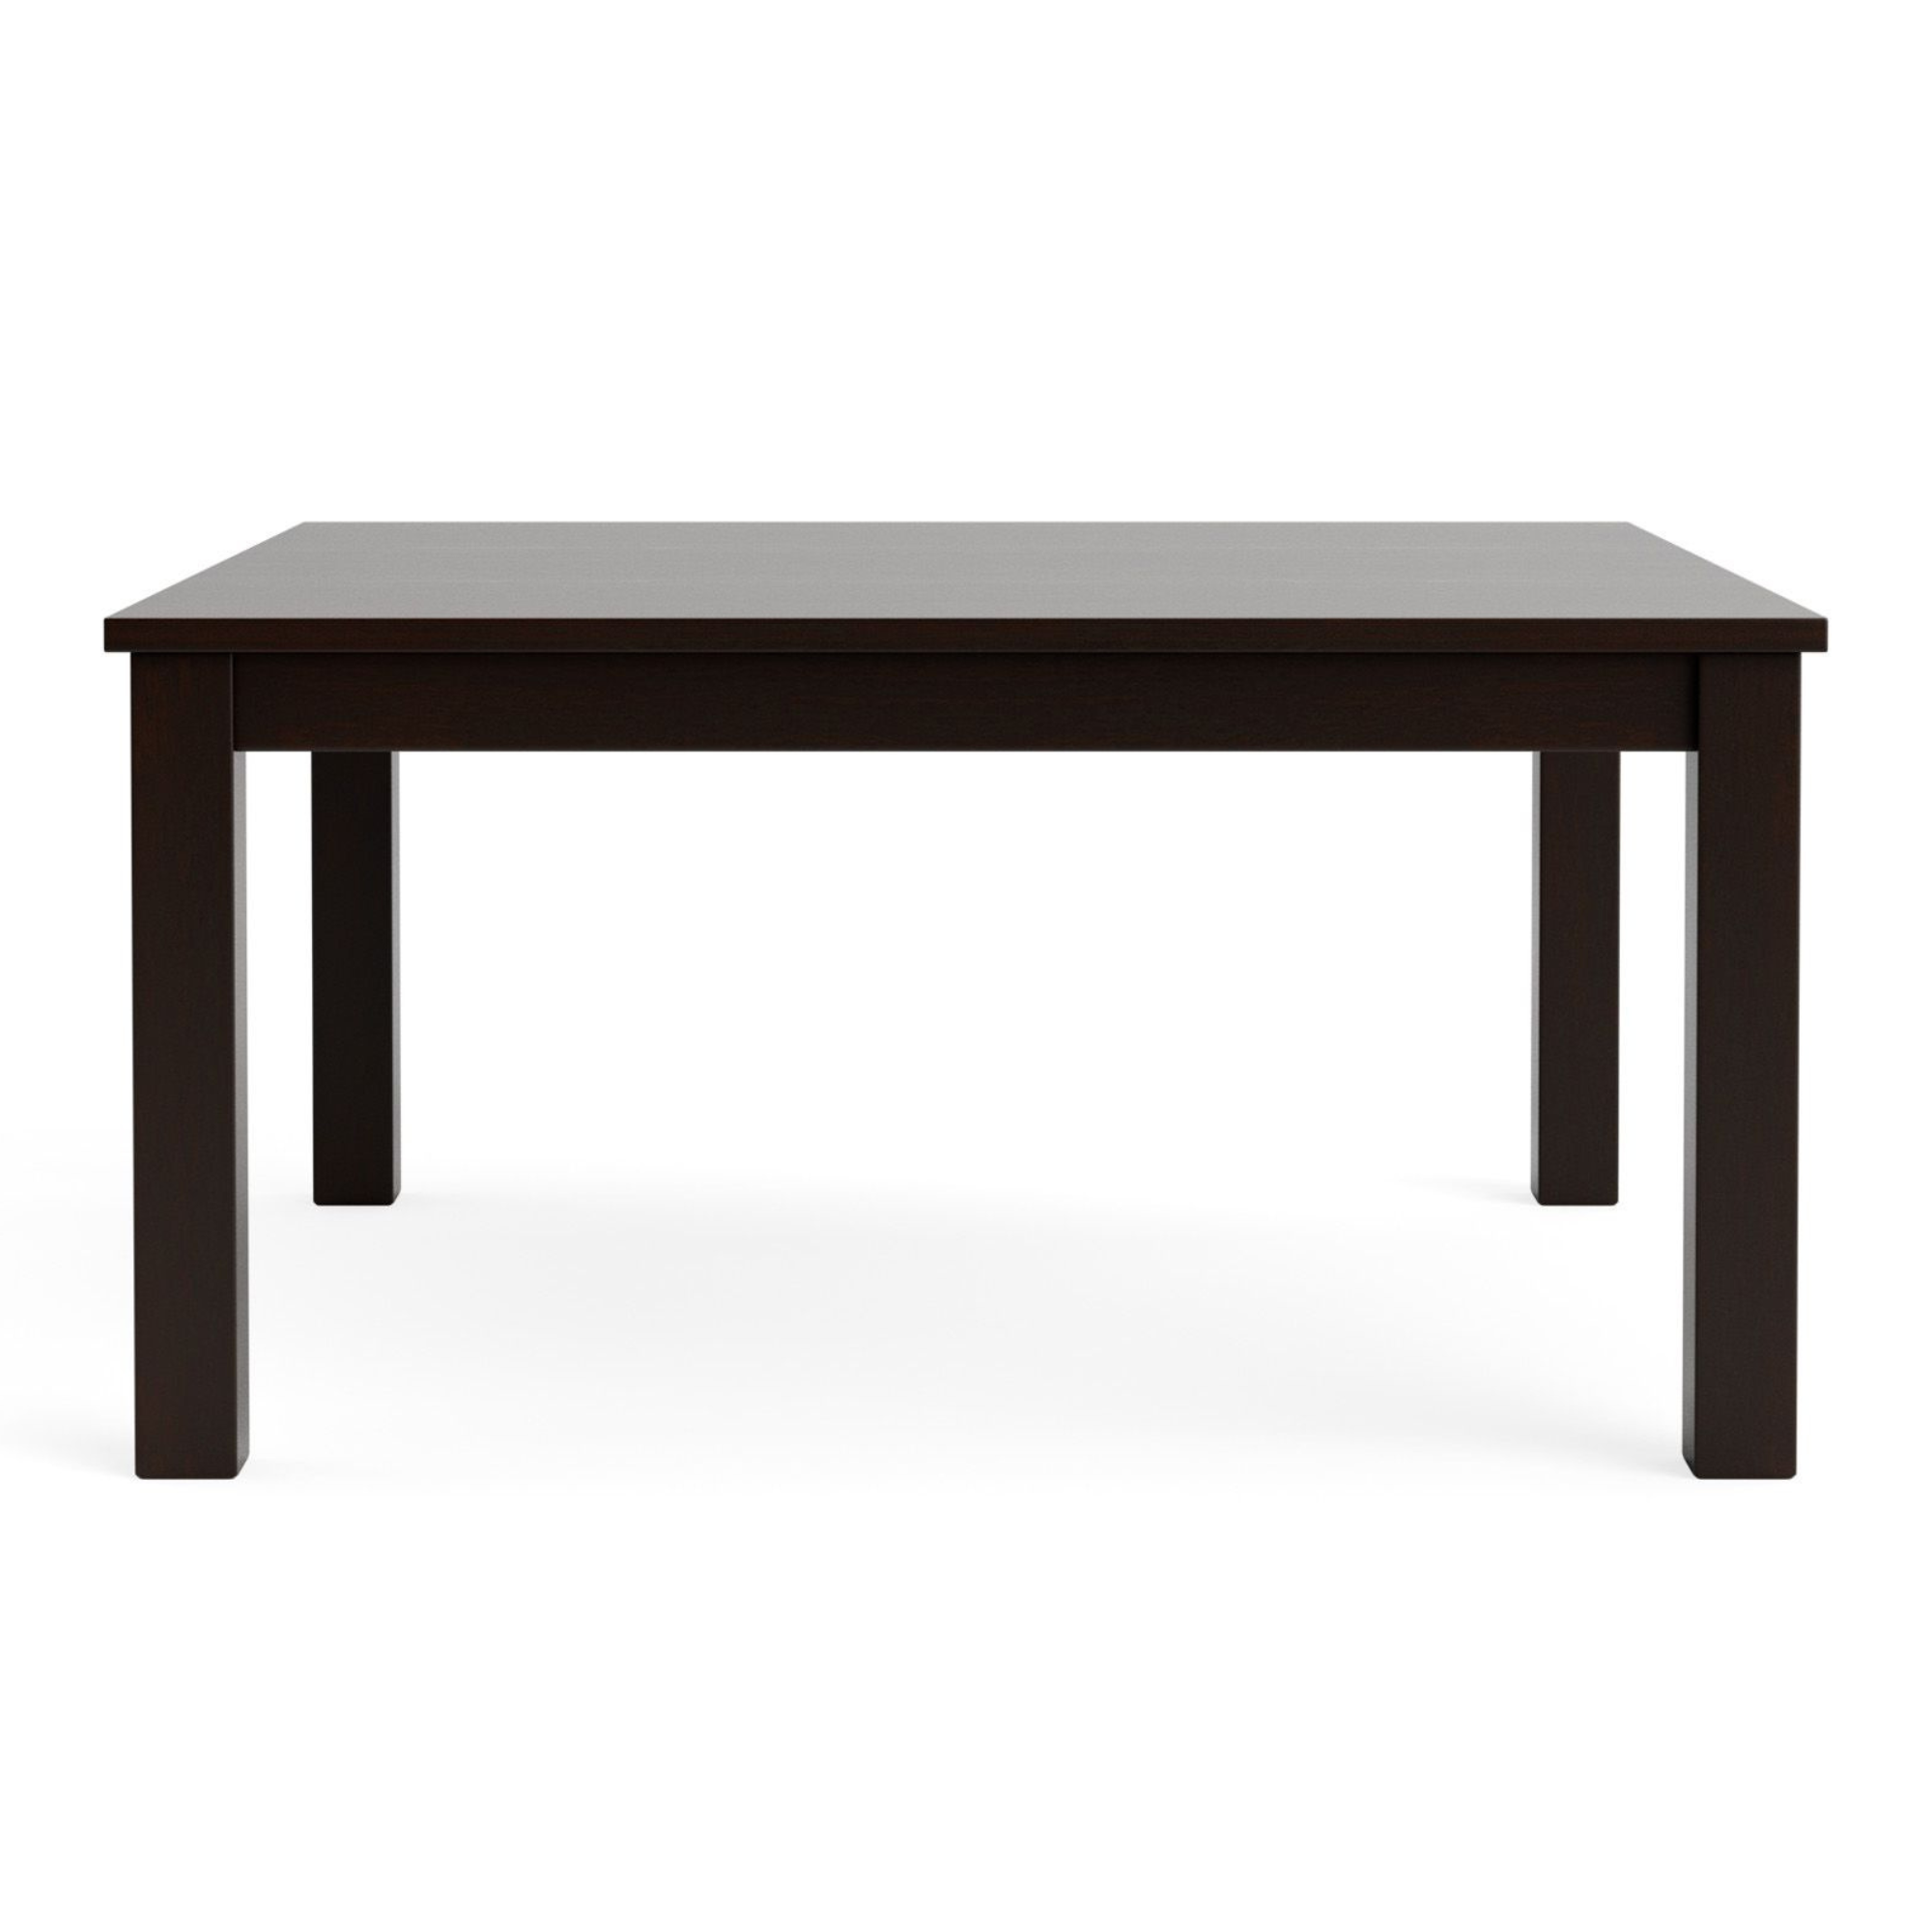 CHARLTON SQUARE 1500 DINING TABLE | NZ MADE